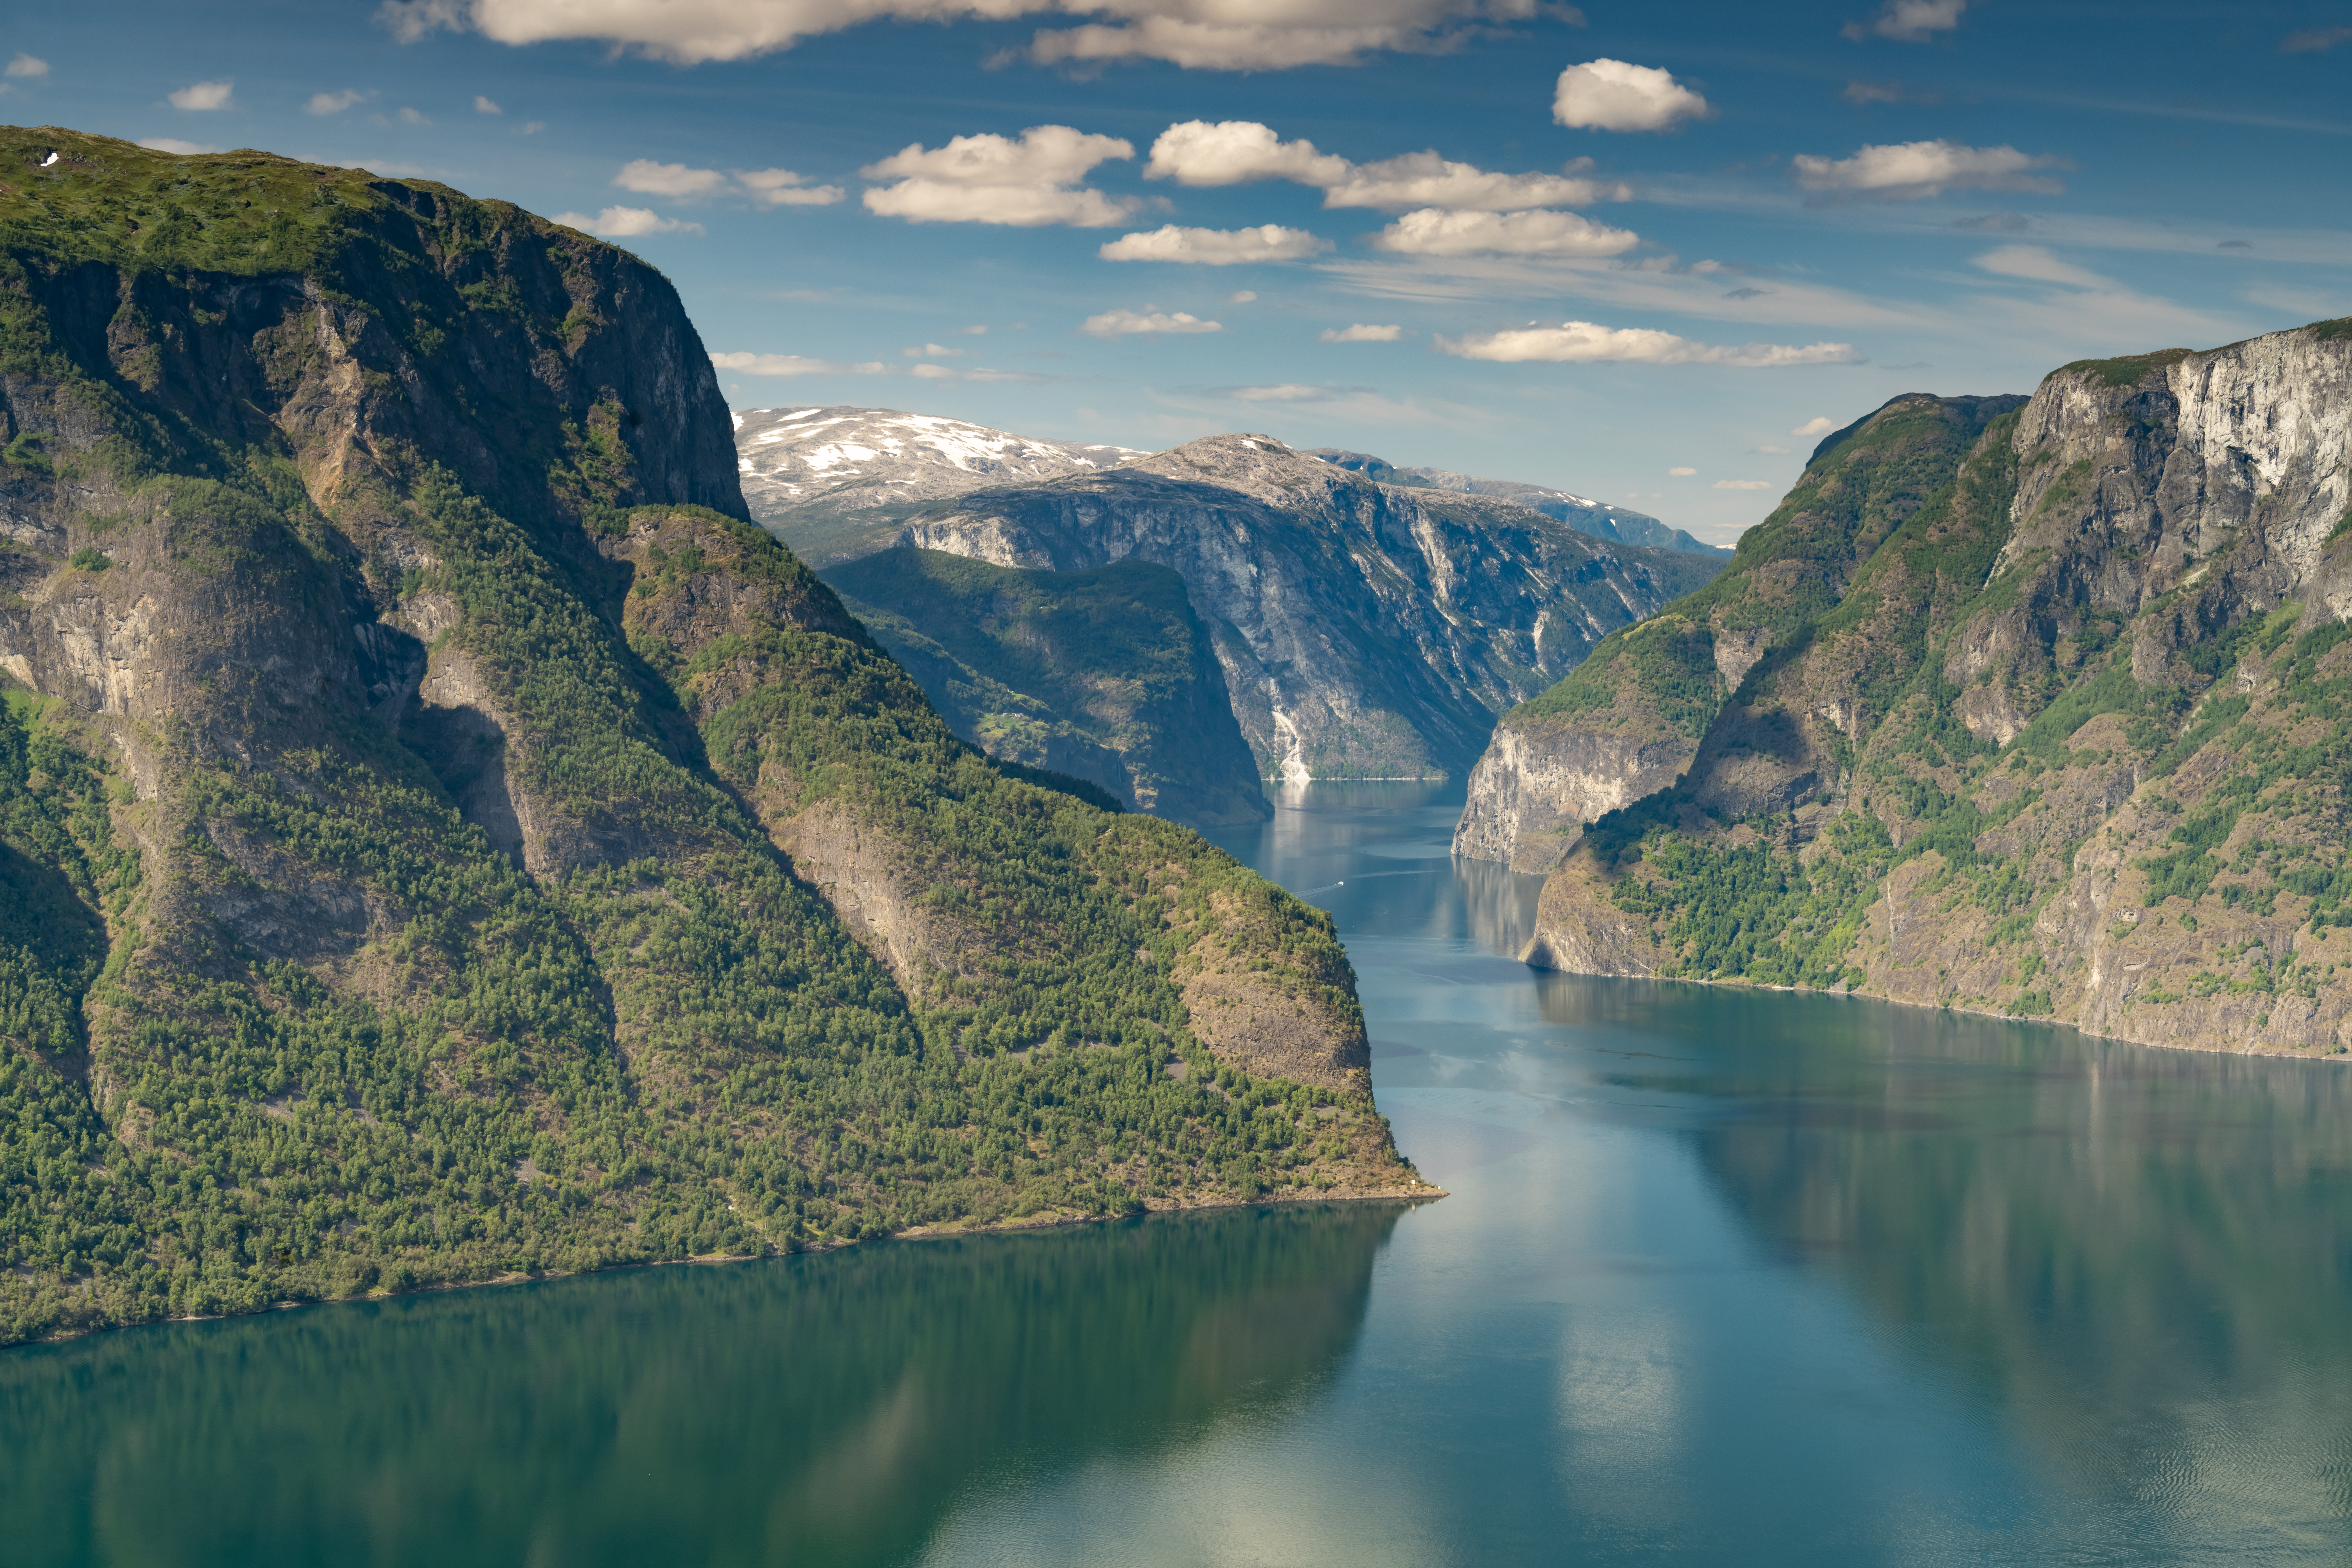 Breathtaking views of the Aurlandsfjord